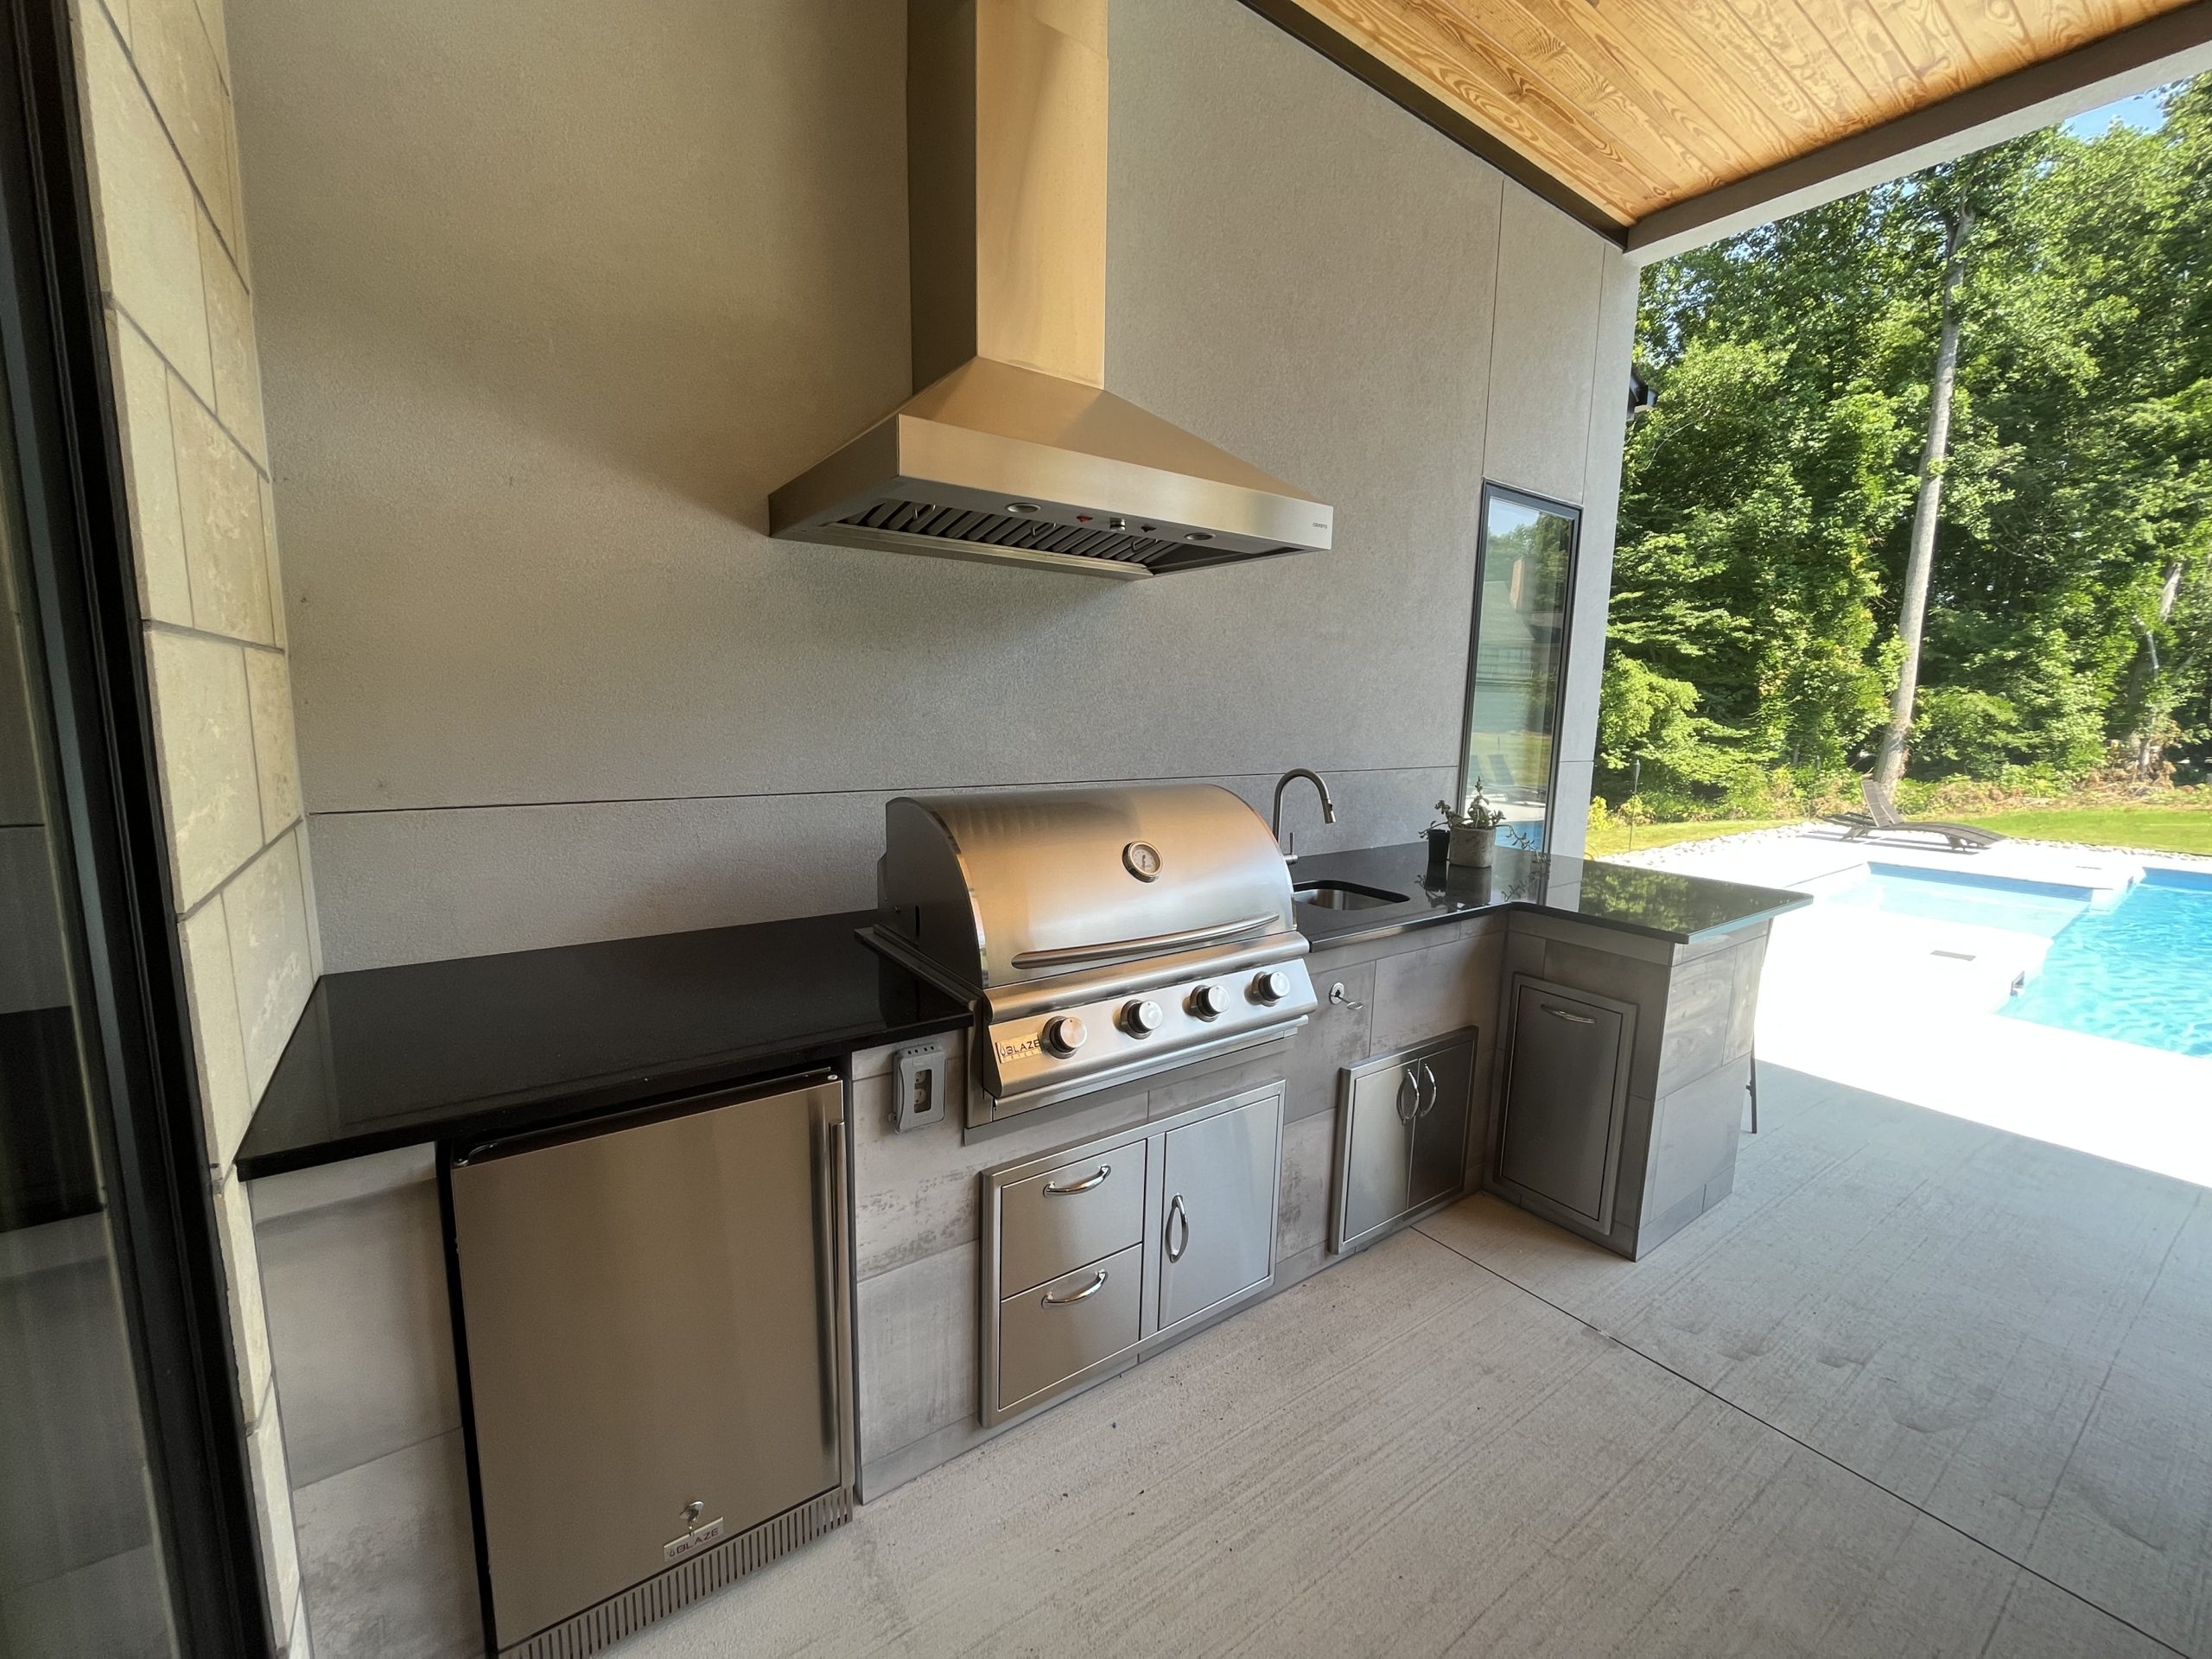 https://www.theflamecompany.com/wp-content/uploads/2022/06/Outdoor-Kitchen-Lewis-Job-3-scaled.jpg